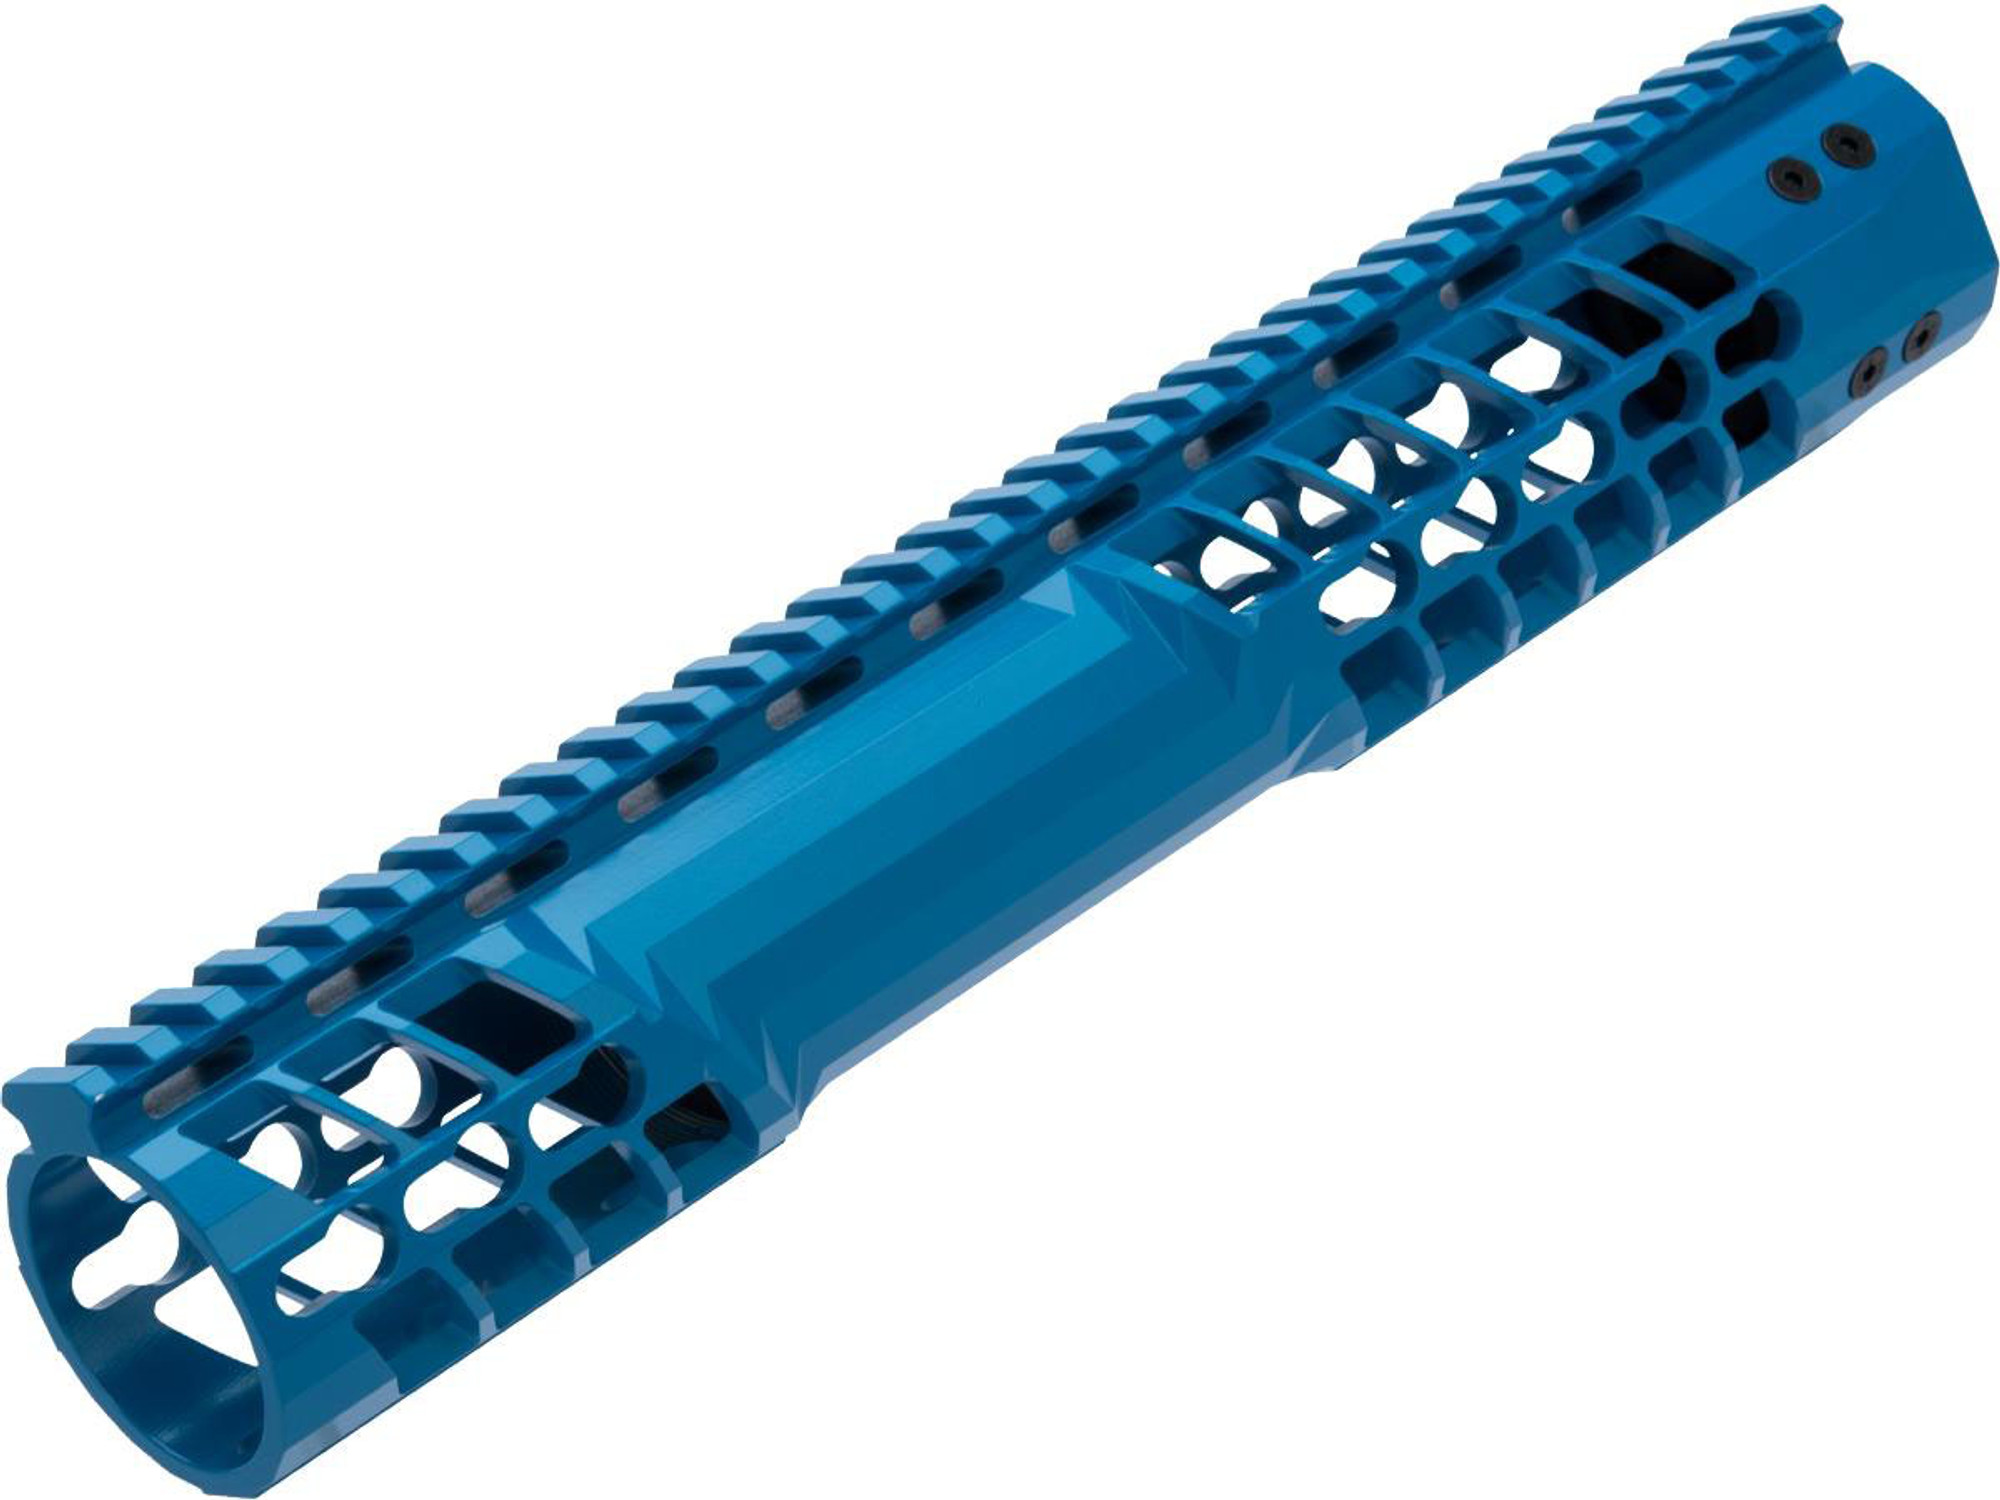 EMG F-1 Firearms Officially Licensed BDR Keymod Handguard for M4/M16 Series Airsoft AEGs (Color: Blue / 12.75")